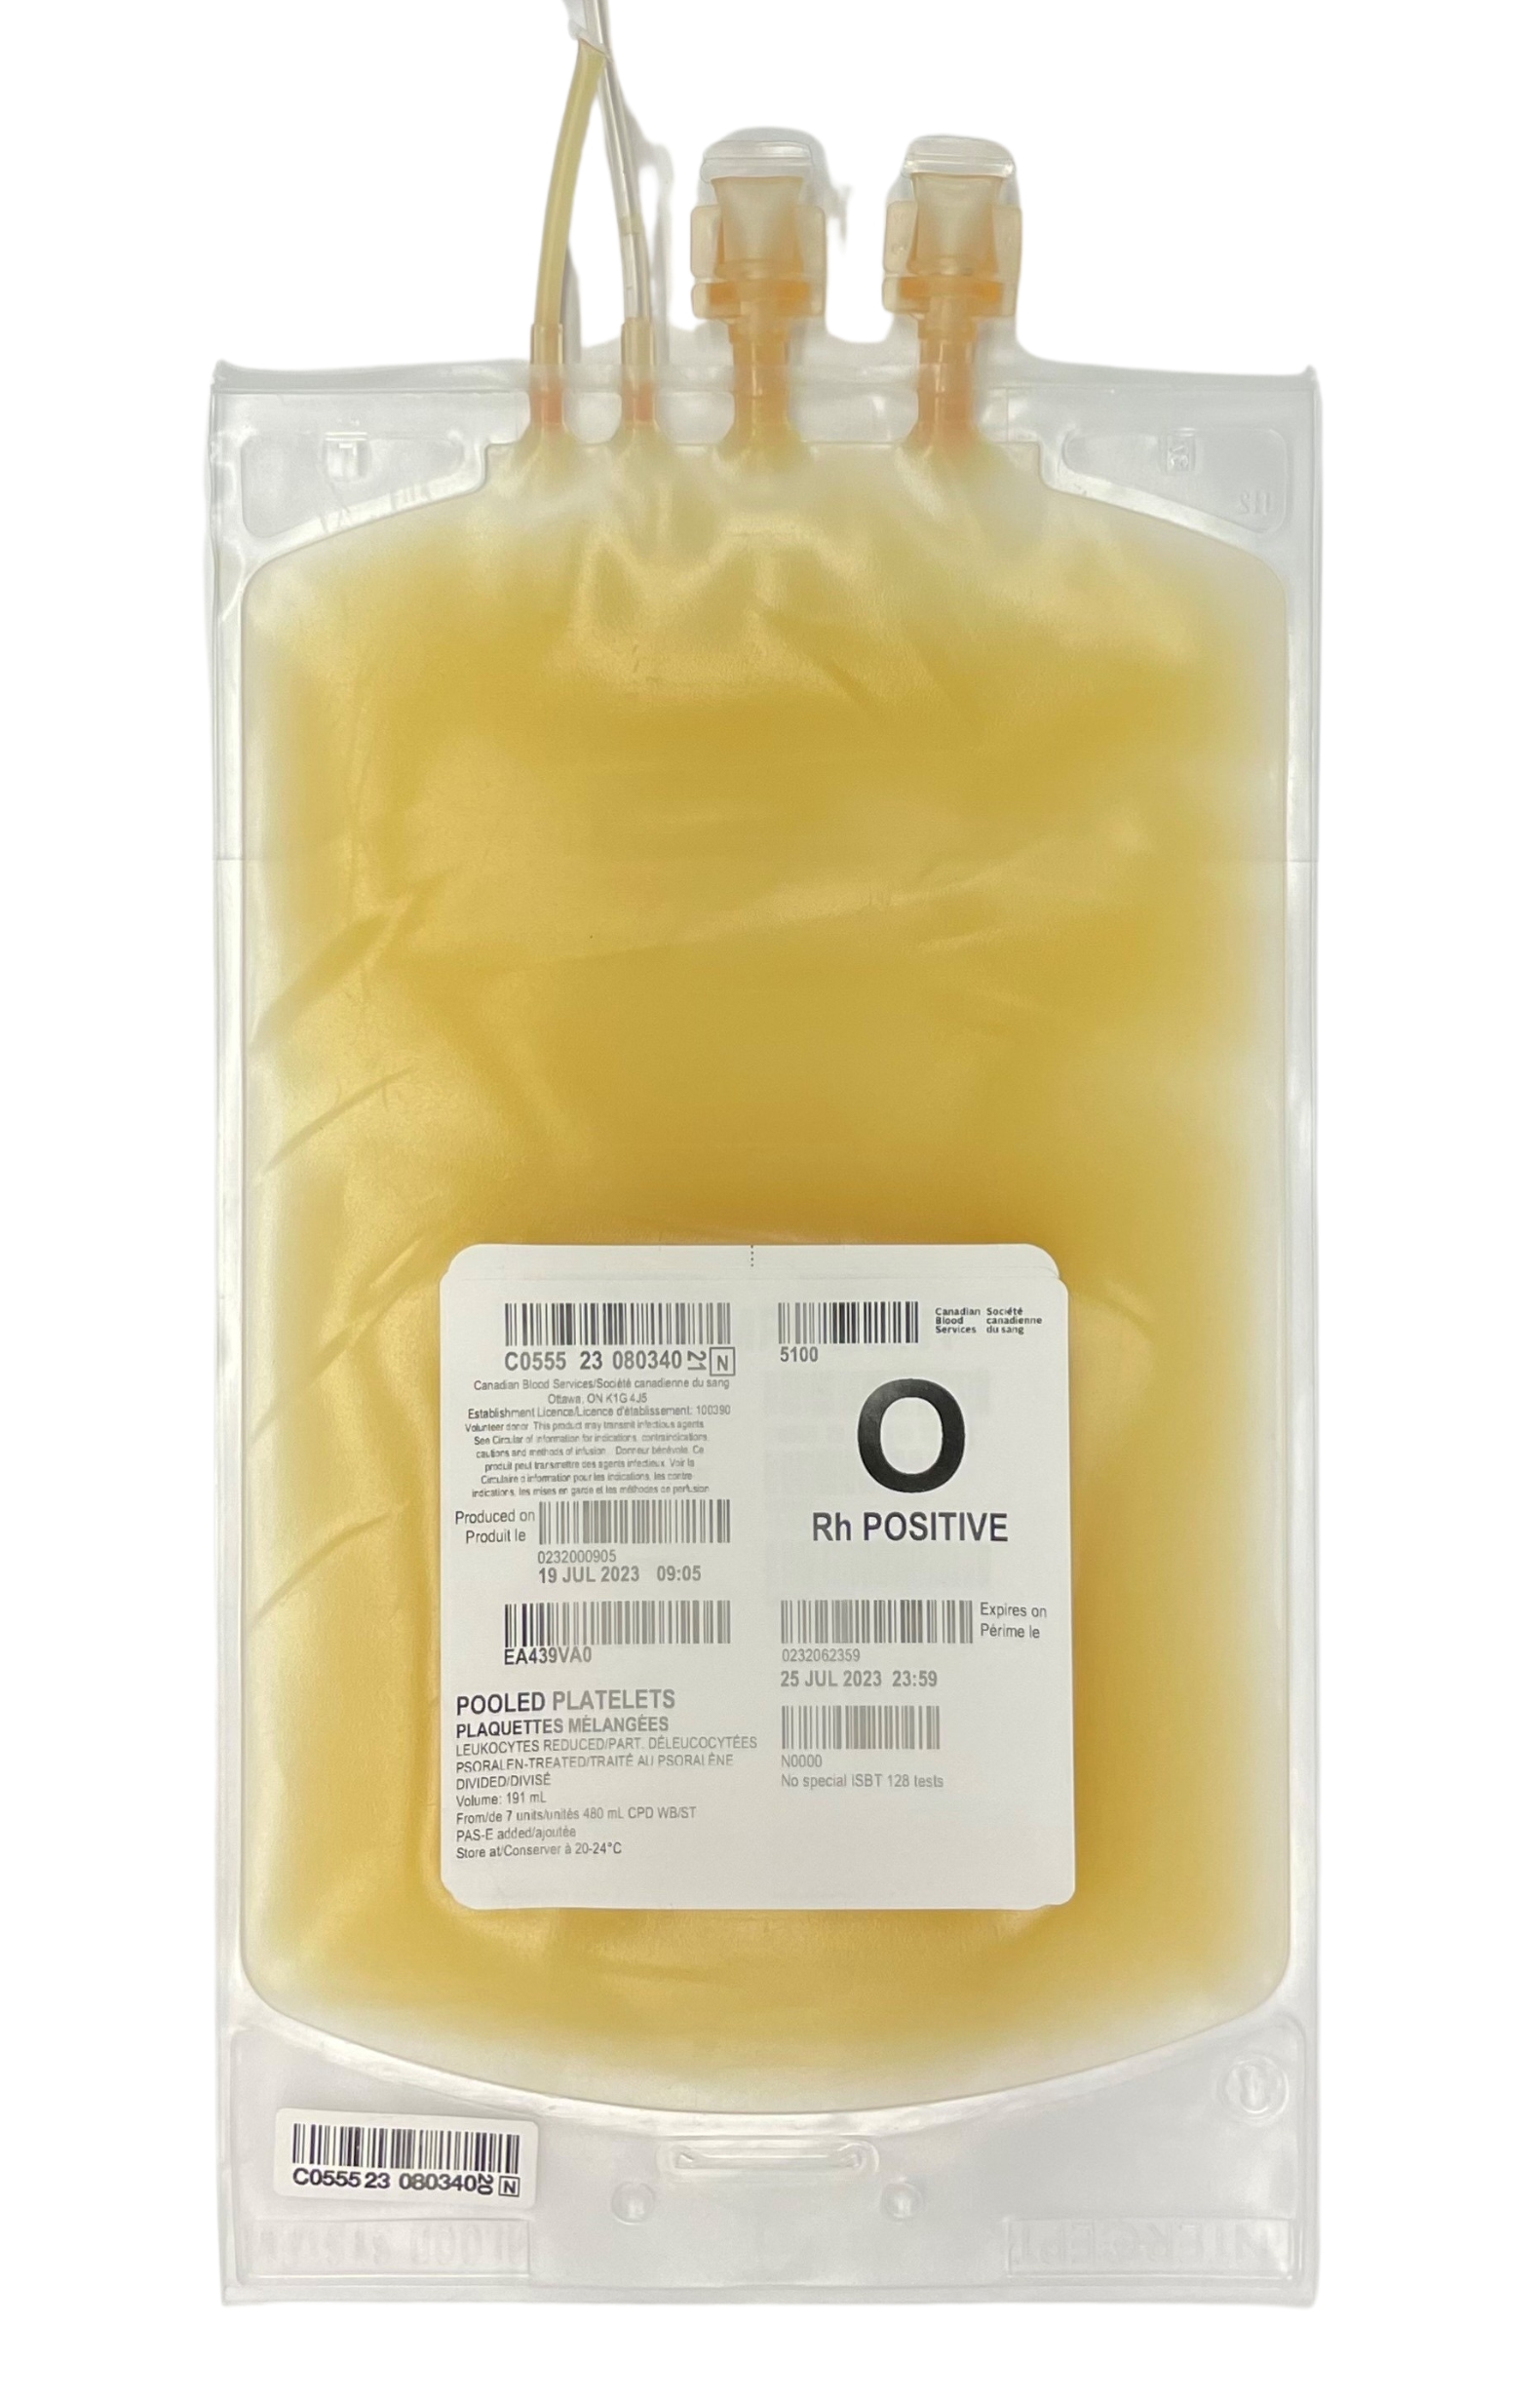 A unit of pooled platelets psoralen-treated (PPPT).